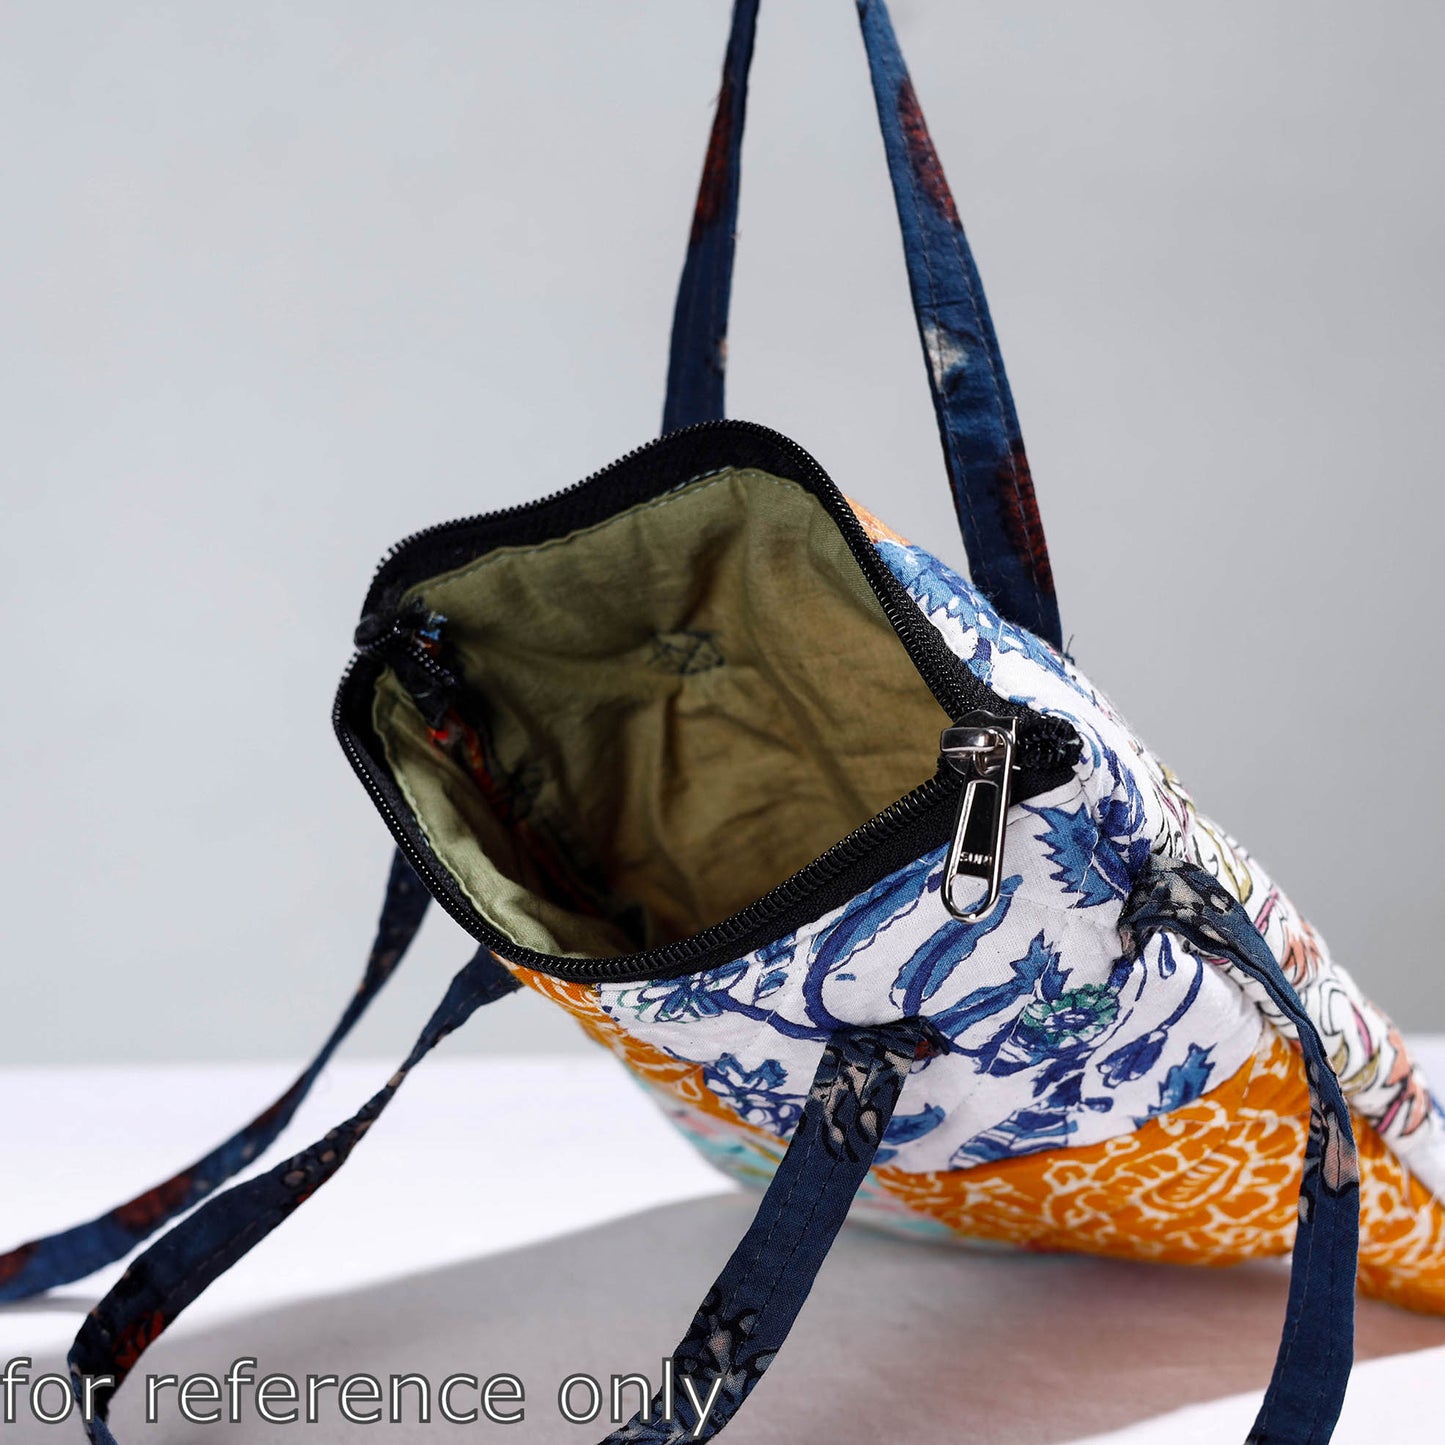 Multicolor - Handmade Quilted Cotton Patchwork Sling Bag 07